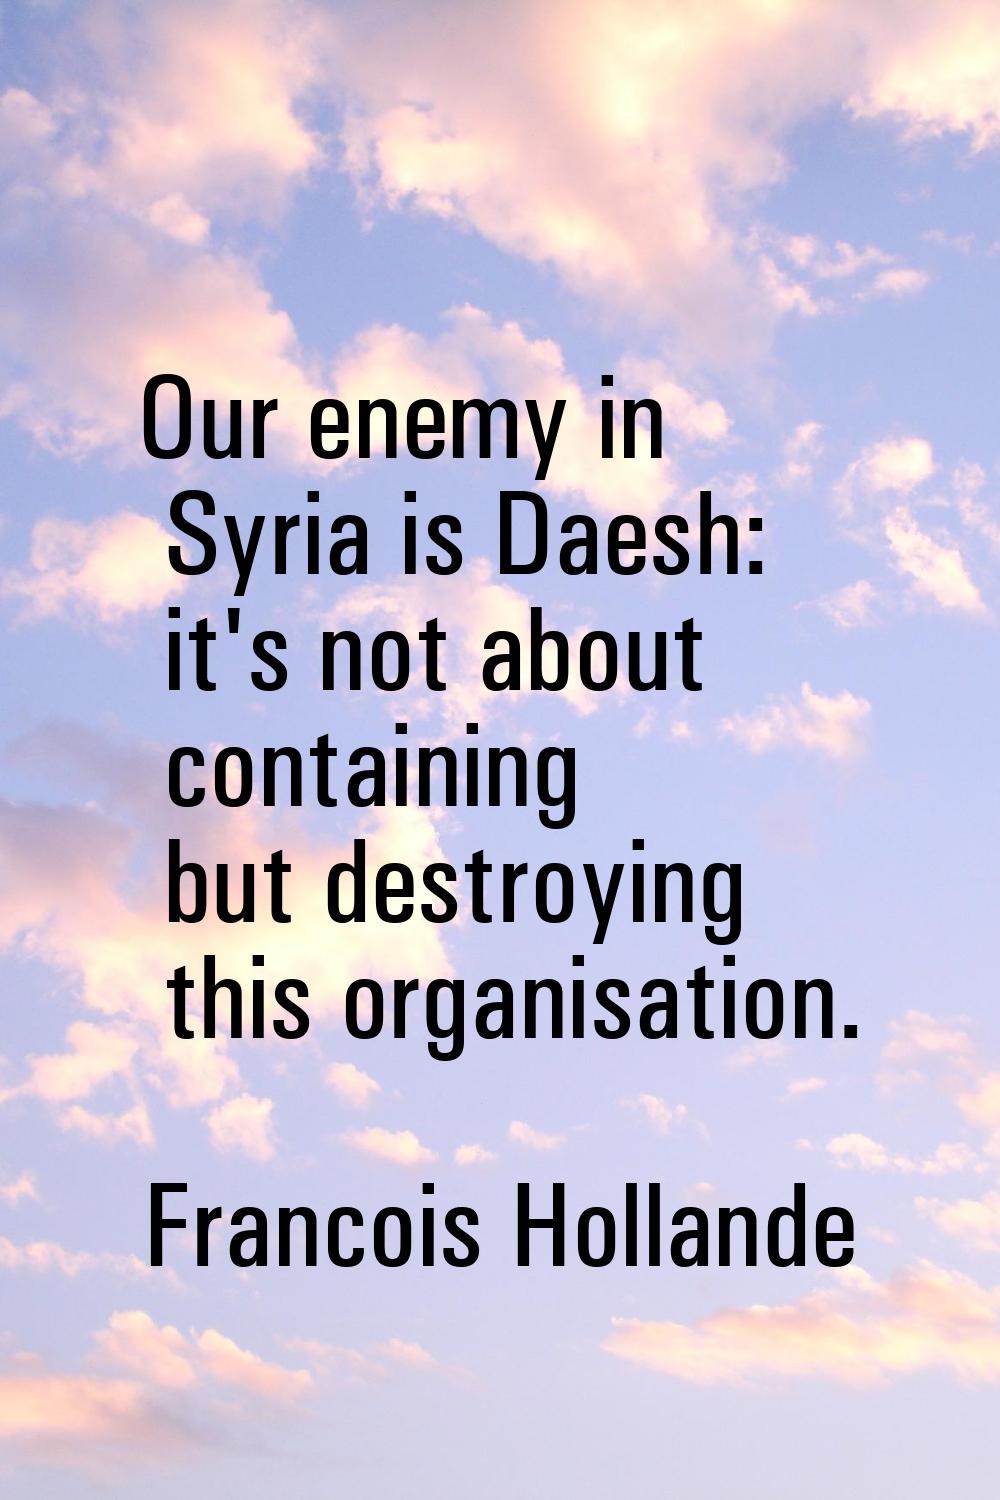 Our enemy in Syria is Daesh: it's not about containing but destroying this organisation.